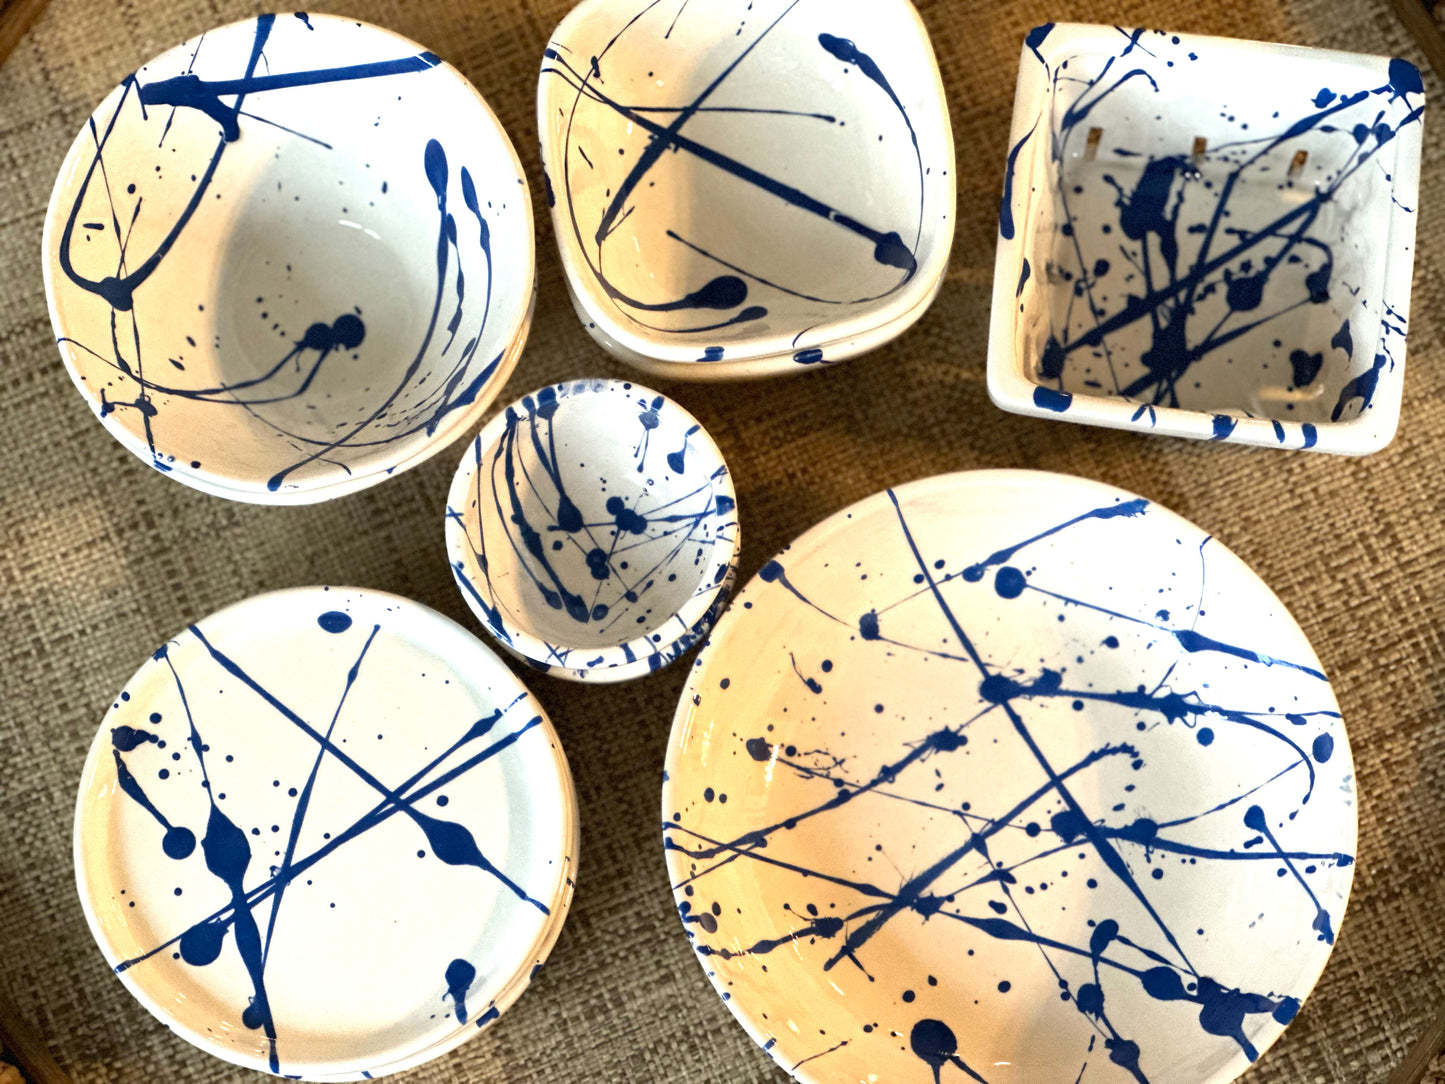 Blue and white square bowl with round corners